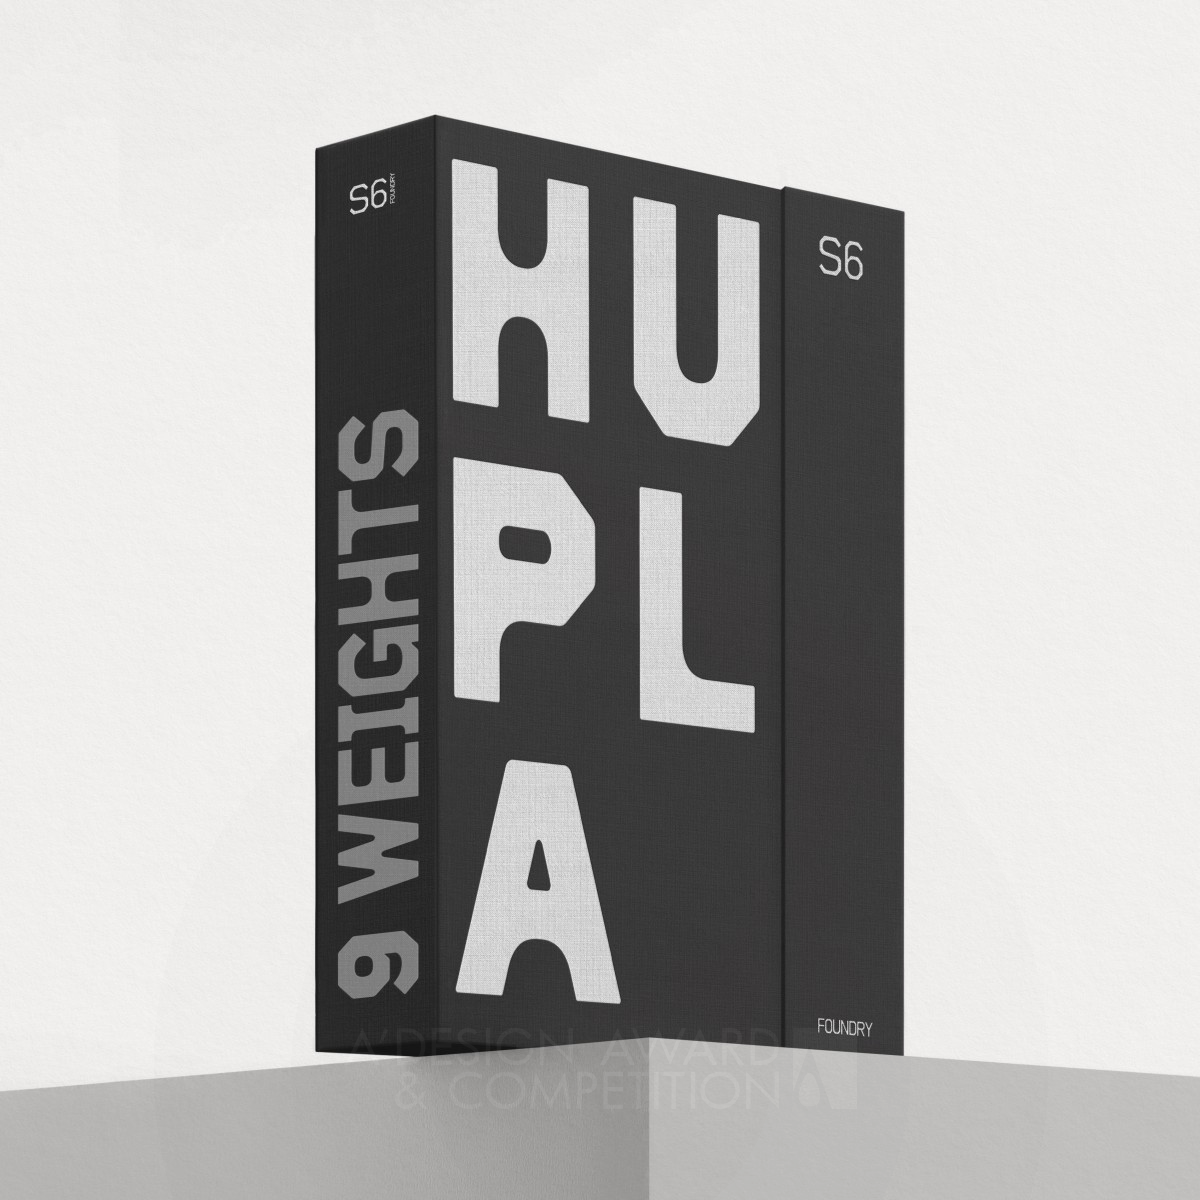 Paul Robb wins Silver at the prestigious A' Graphics, Illustration and Visual Communication Design Award with Hupla Typeface  Type Design And Type Specimen.